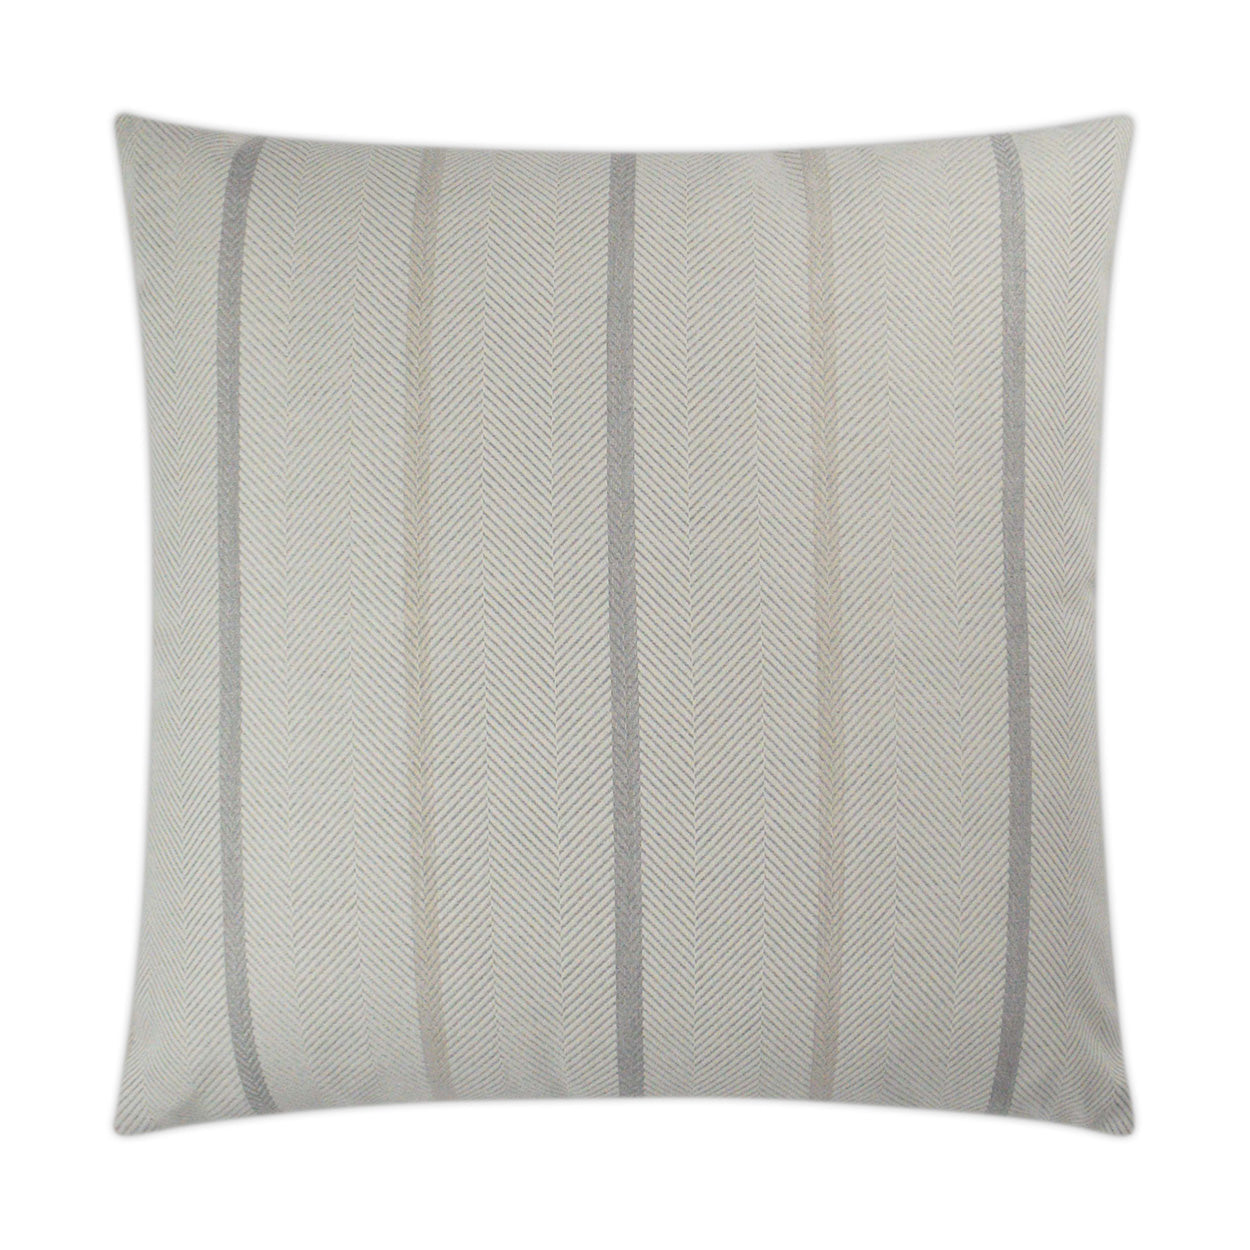 Outdoor Sterling Pillow - Cotton